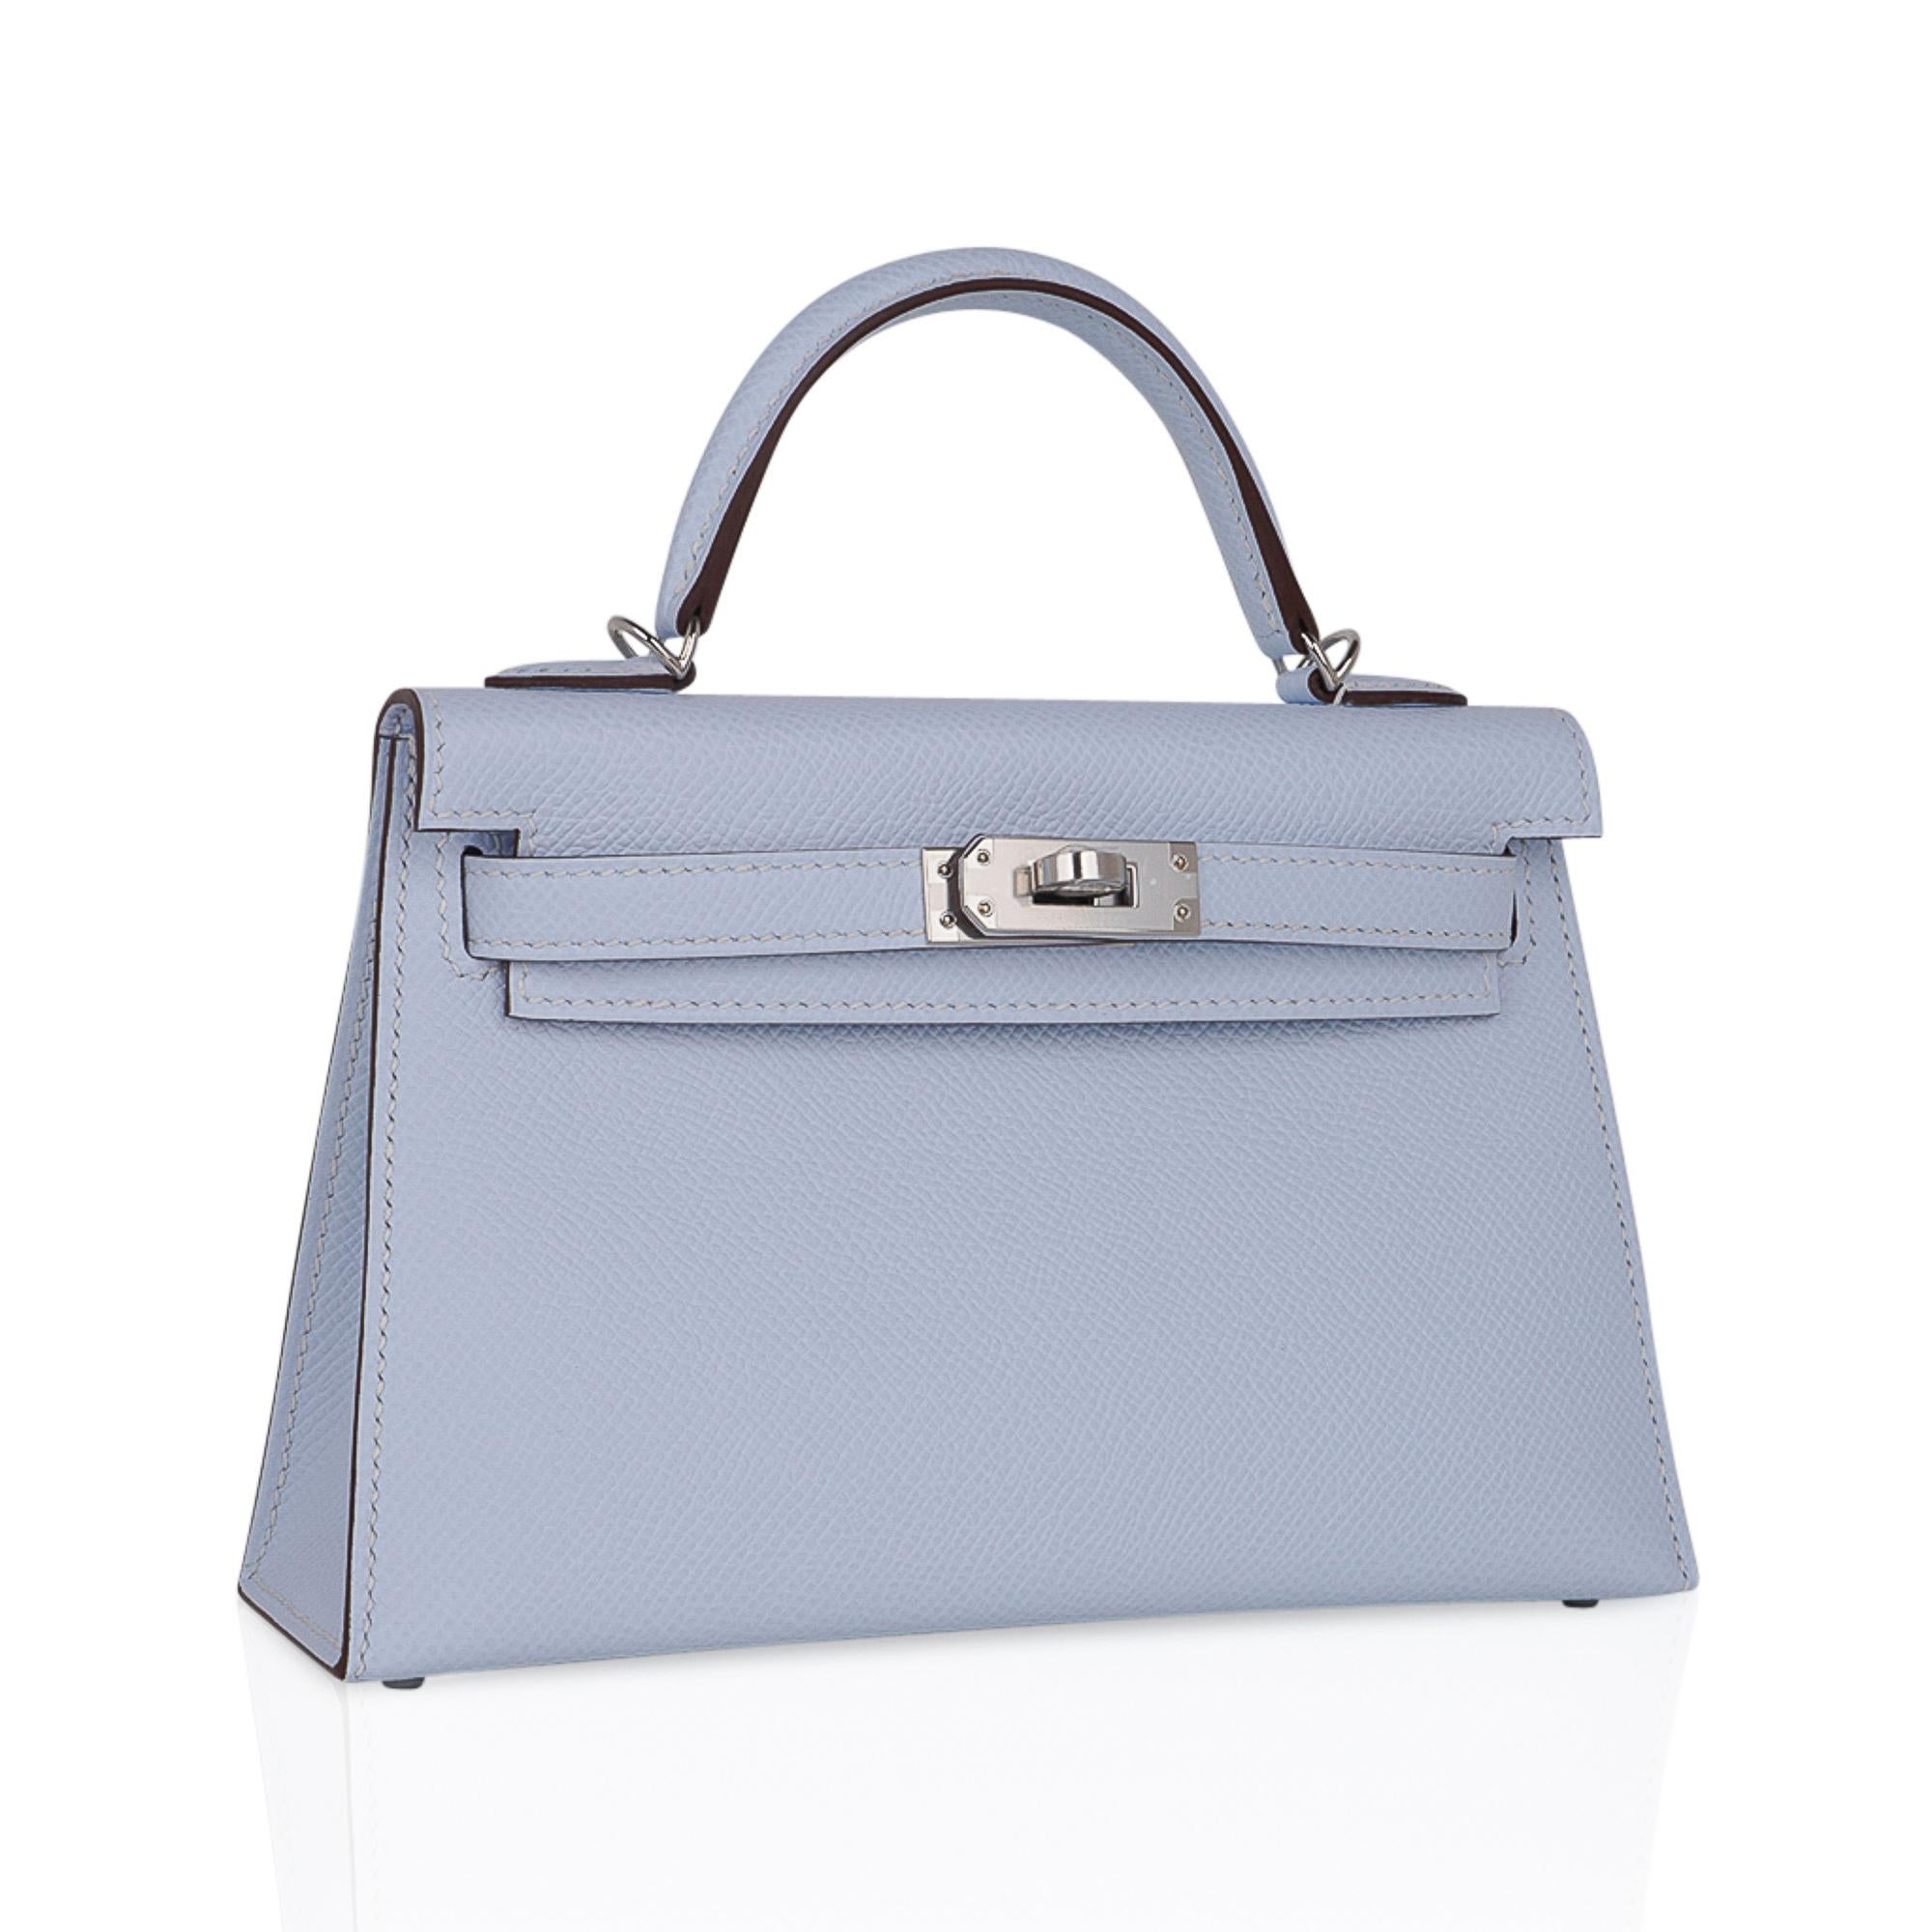 Mightychic offers an Hermes Kelly 20 Mini Sellier bag featured in exquisite Blue Brume.
Espom leather accentuated with Palladium hardware.
Hermes Bleu Brume is a soft, light blue which is gorgeous for year round wear, and completely neutral.
Comes